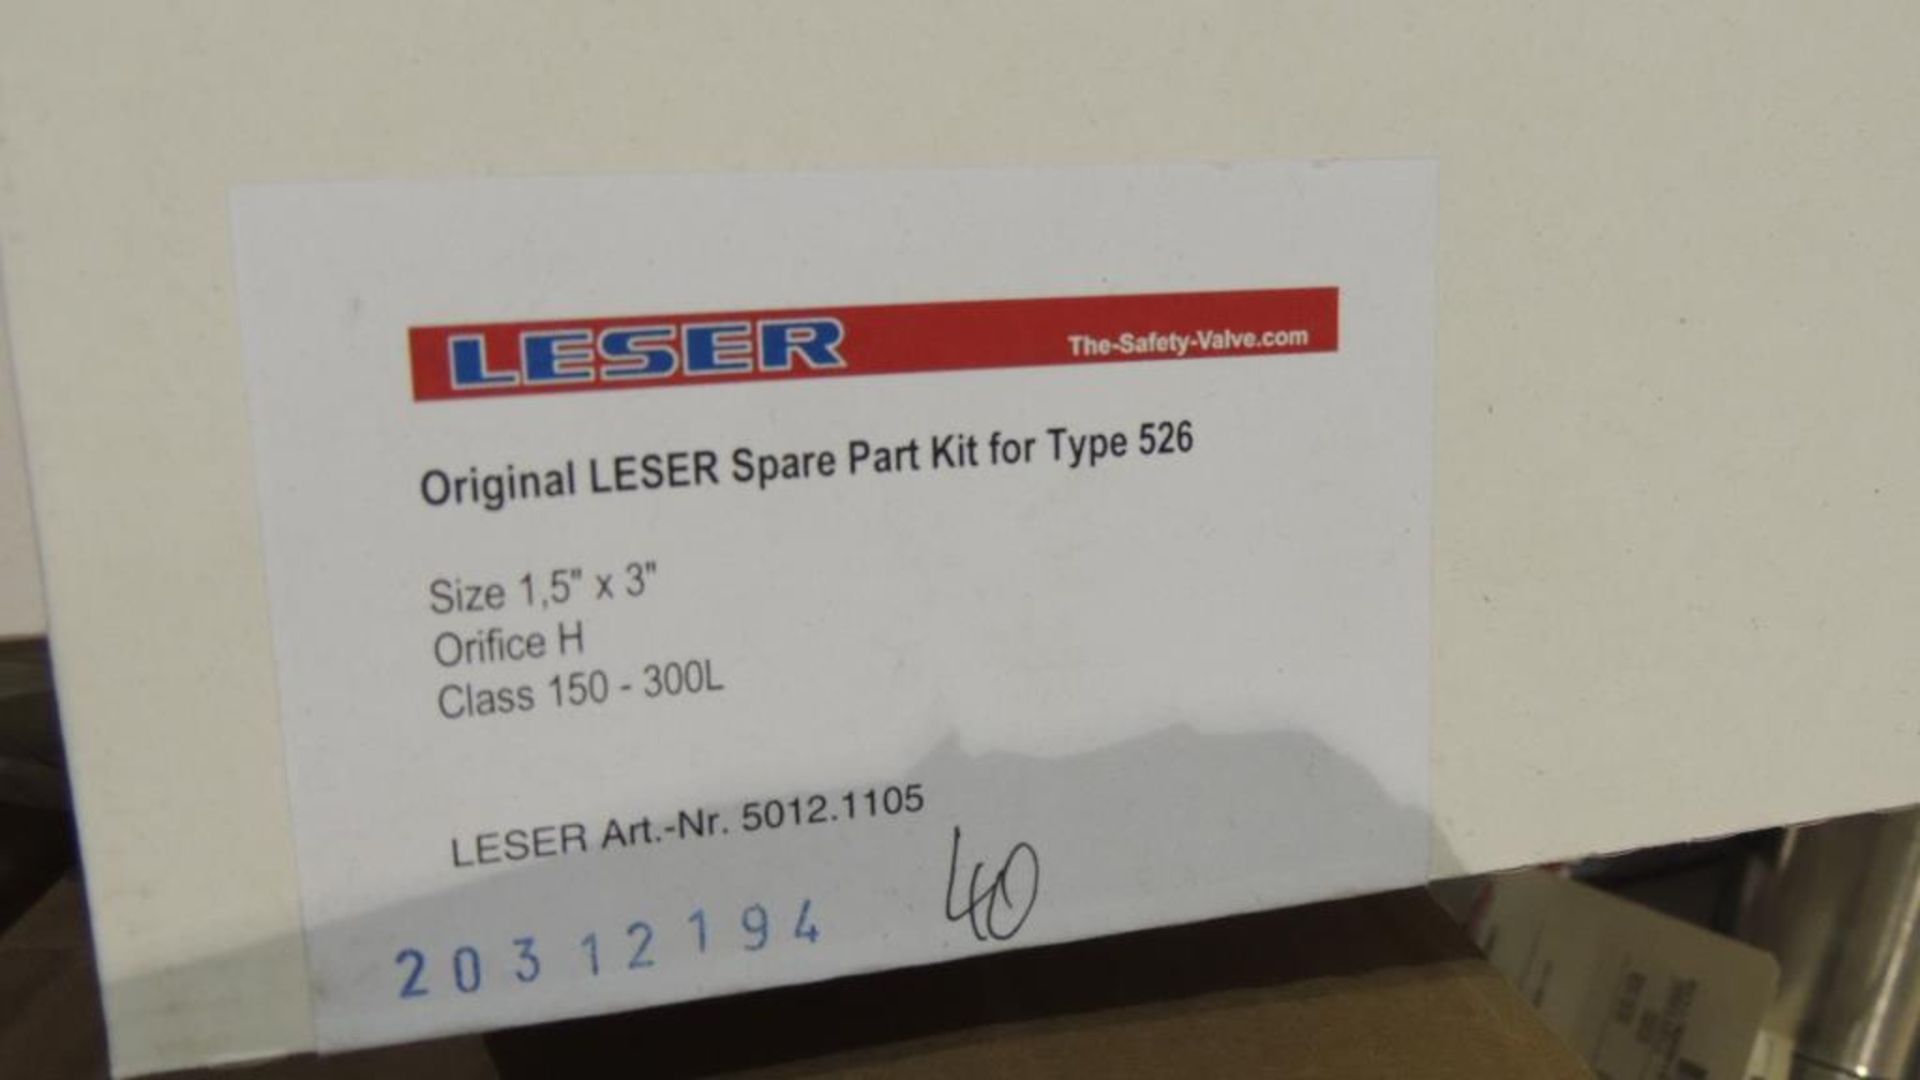 Large Quantity of Leser Relief and Safety Valves, plus Spare Parts Kits - Image 91 of 374